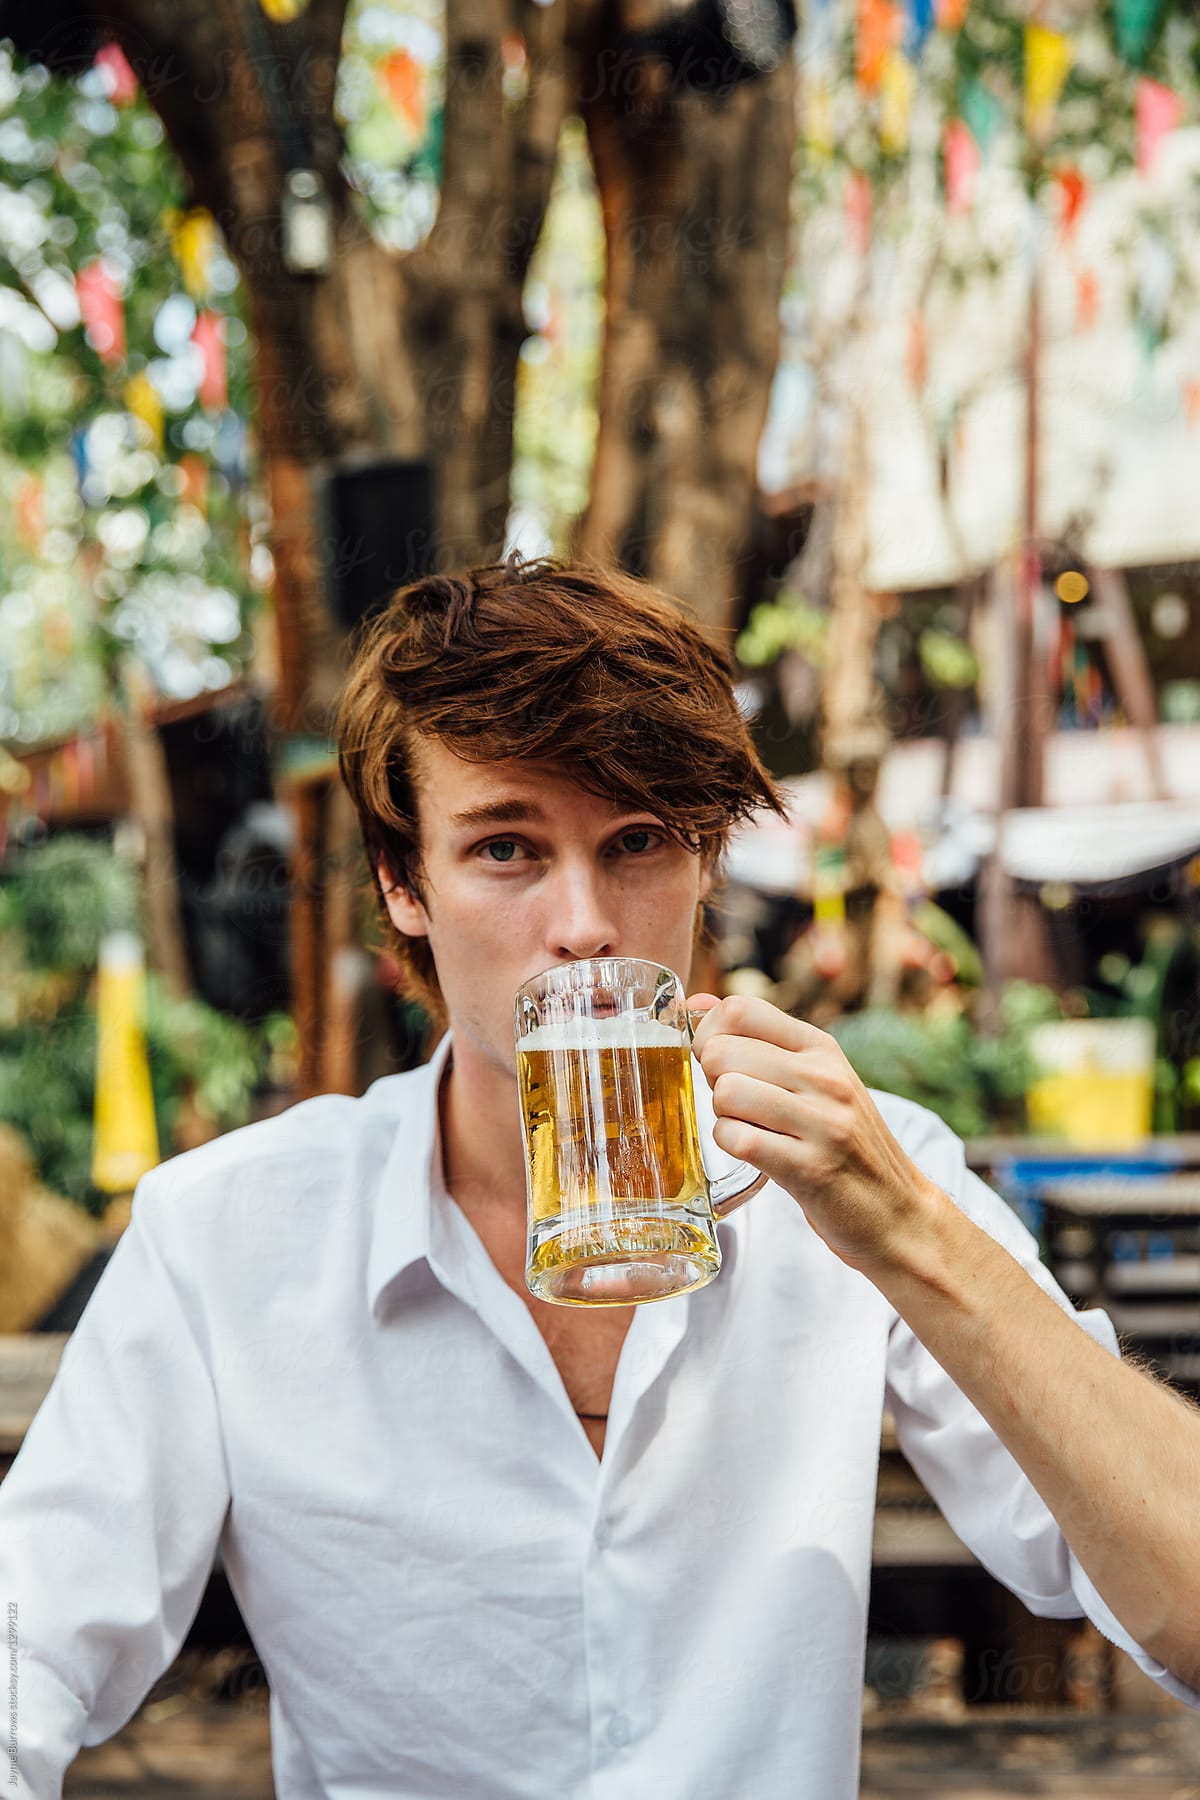 Young Man Drinking Beer by Jayme Burrows - Stocksy United